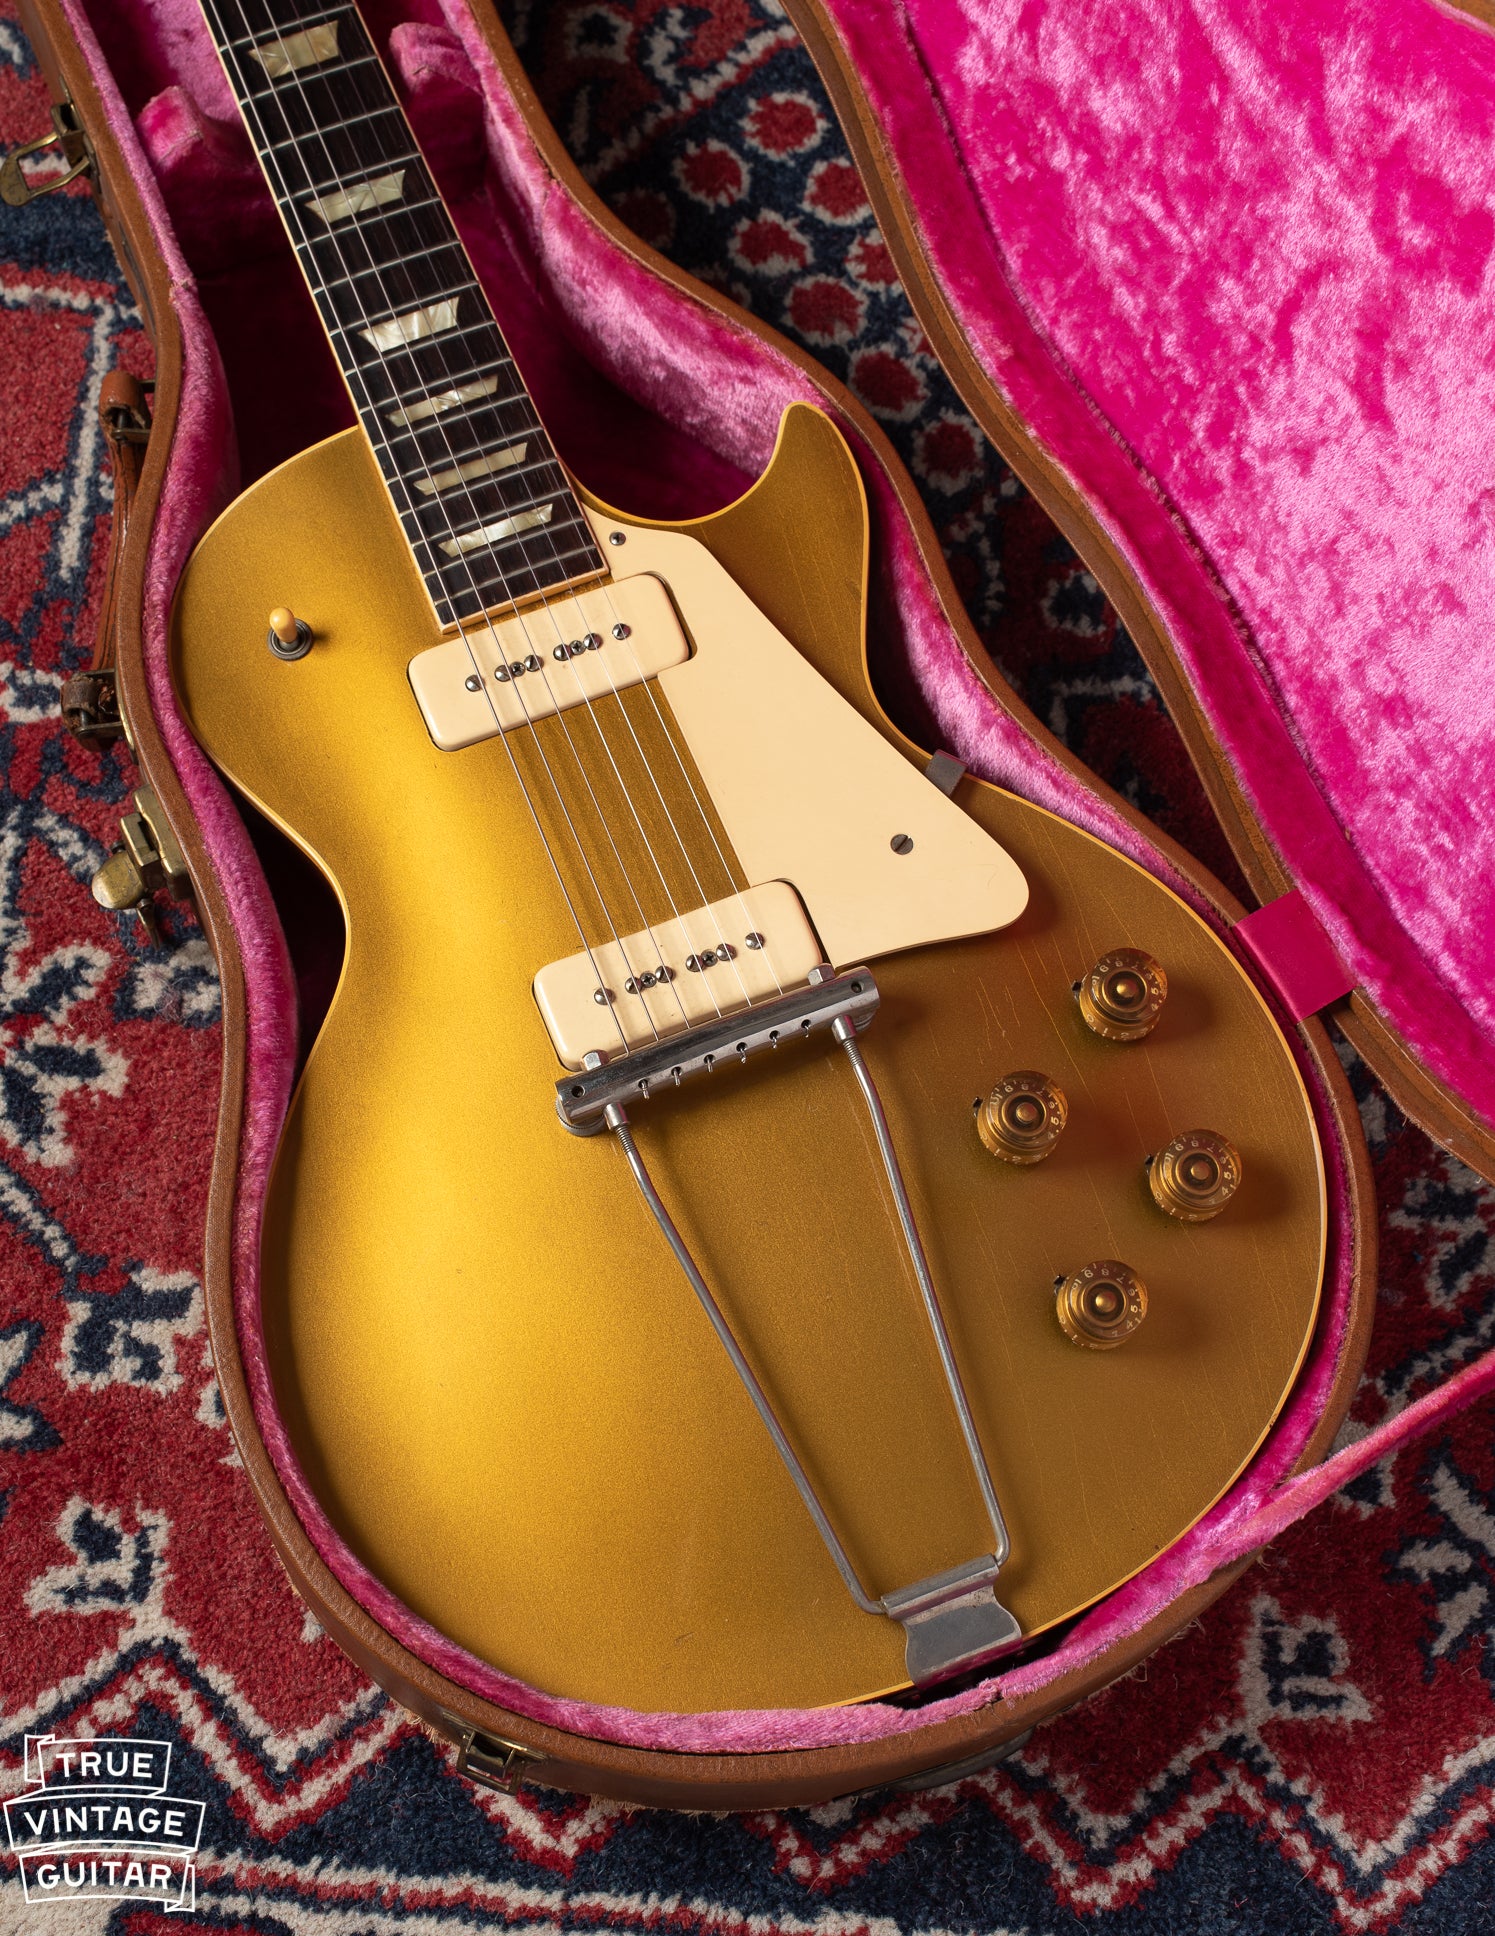 Gibson Les Paul Goldtop 1952 in original pink and brown case